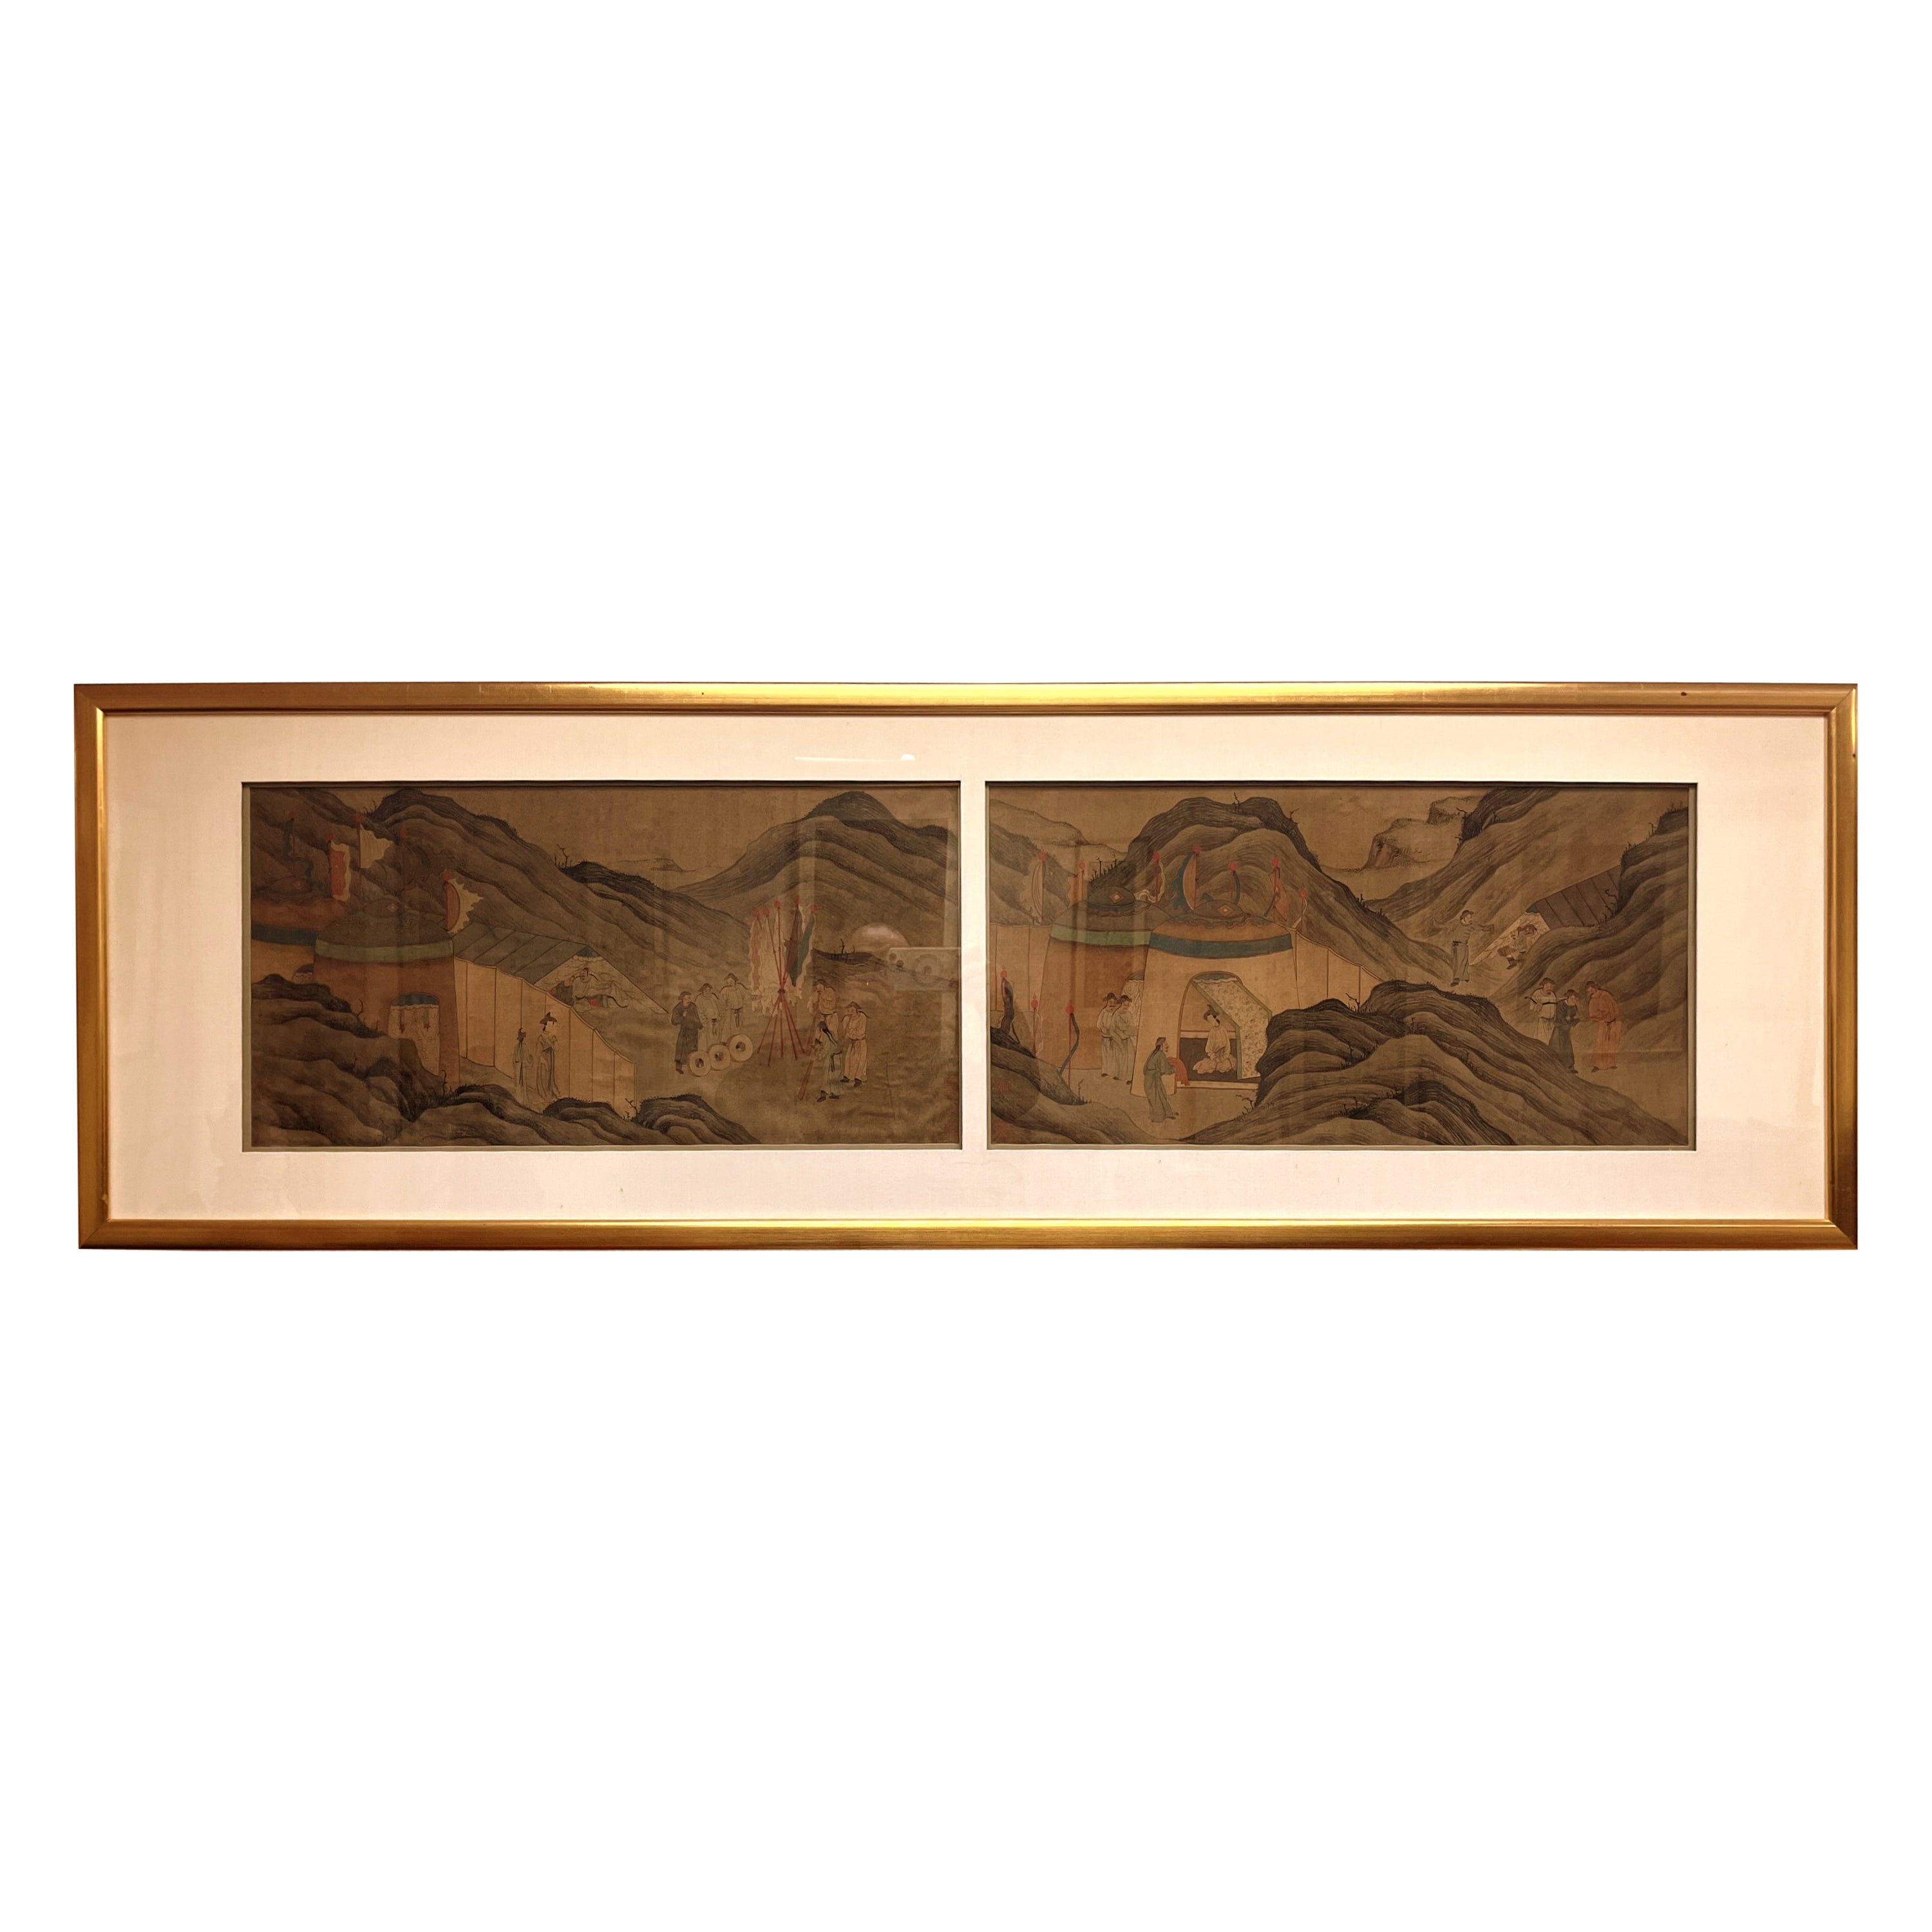 Framed Chinese Paintings of Northern Asian Nomadic Ethnic Group Livings For Sale